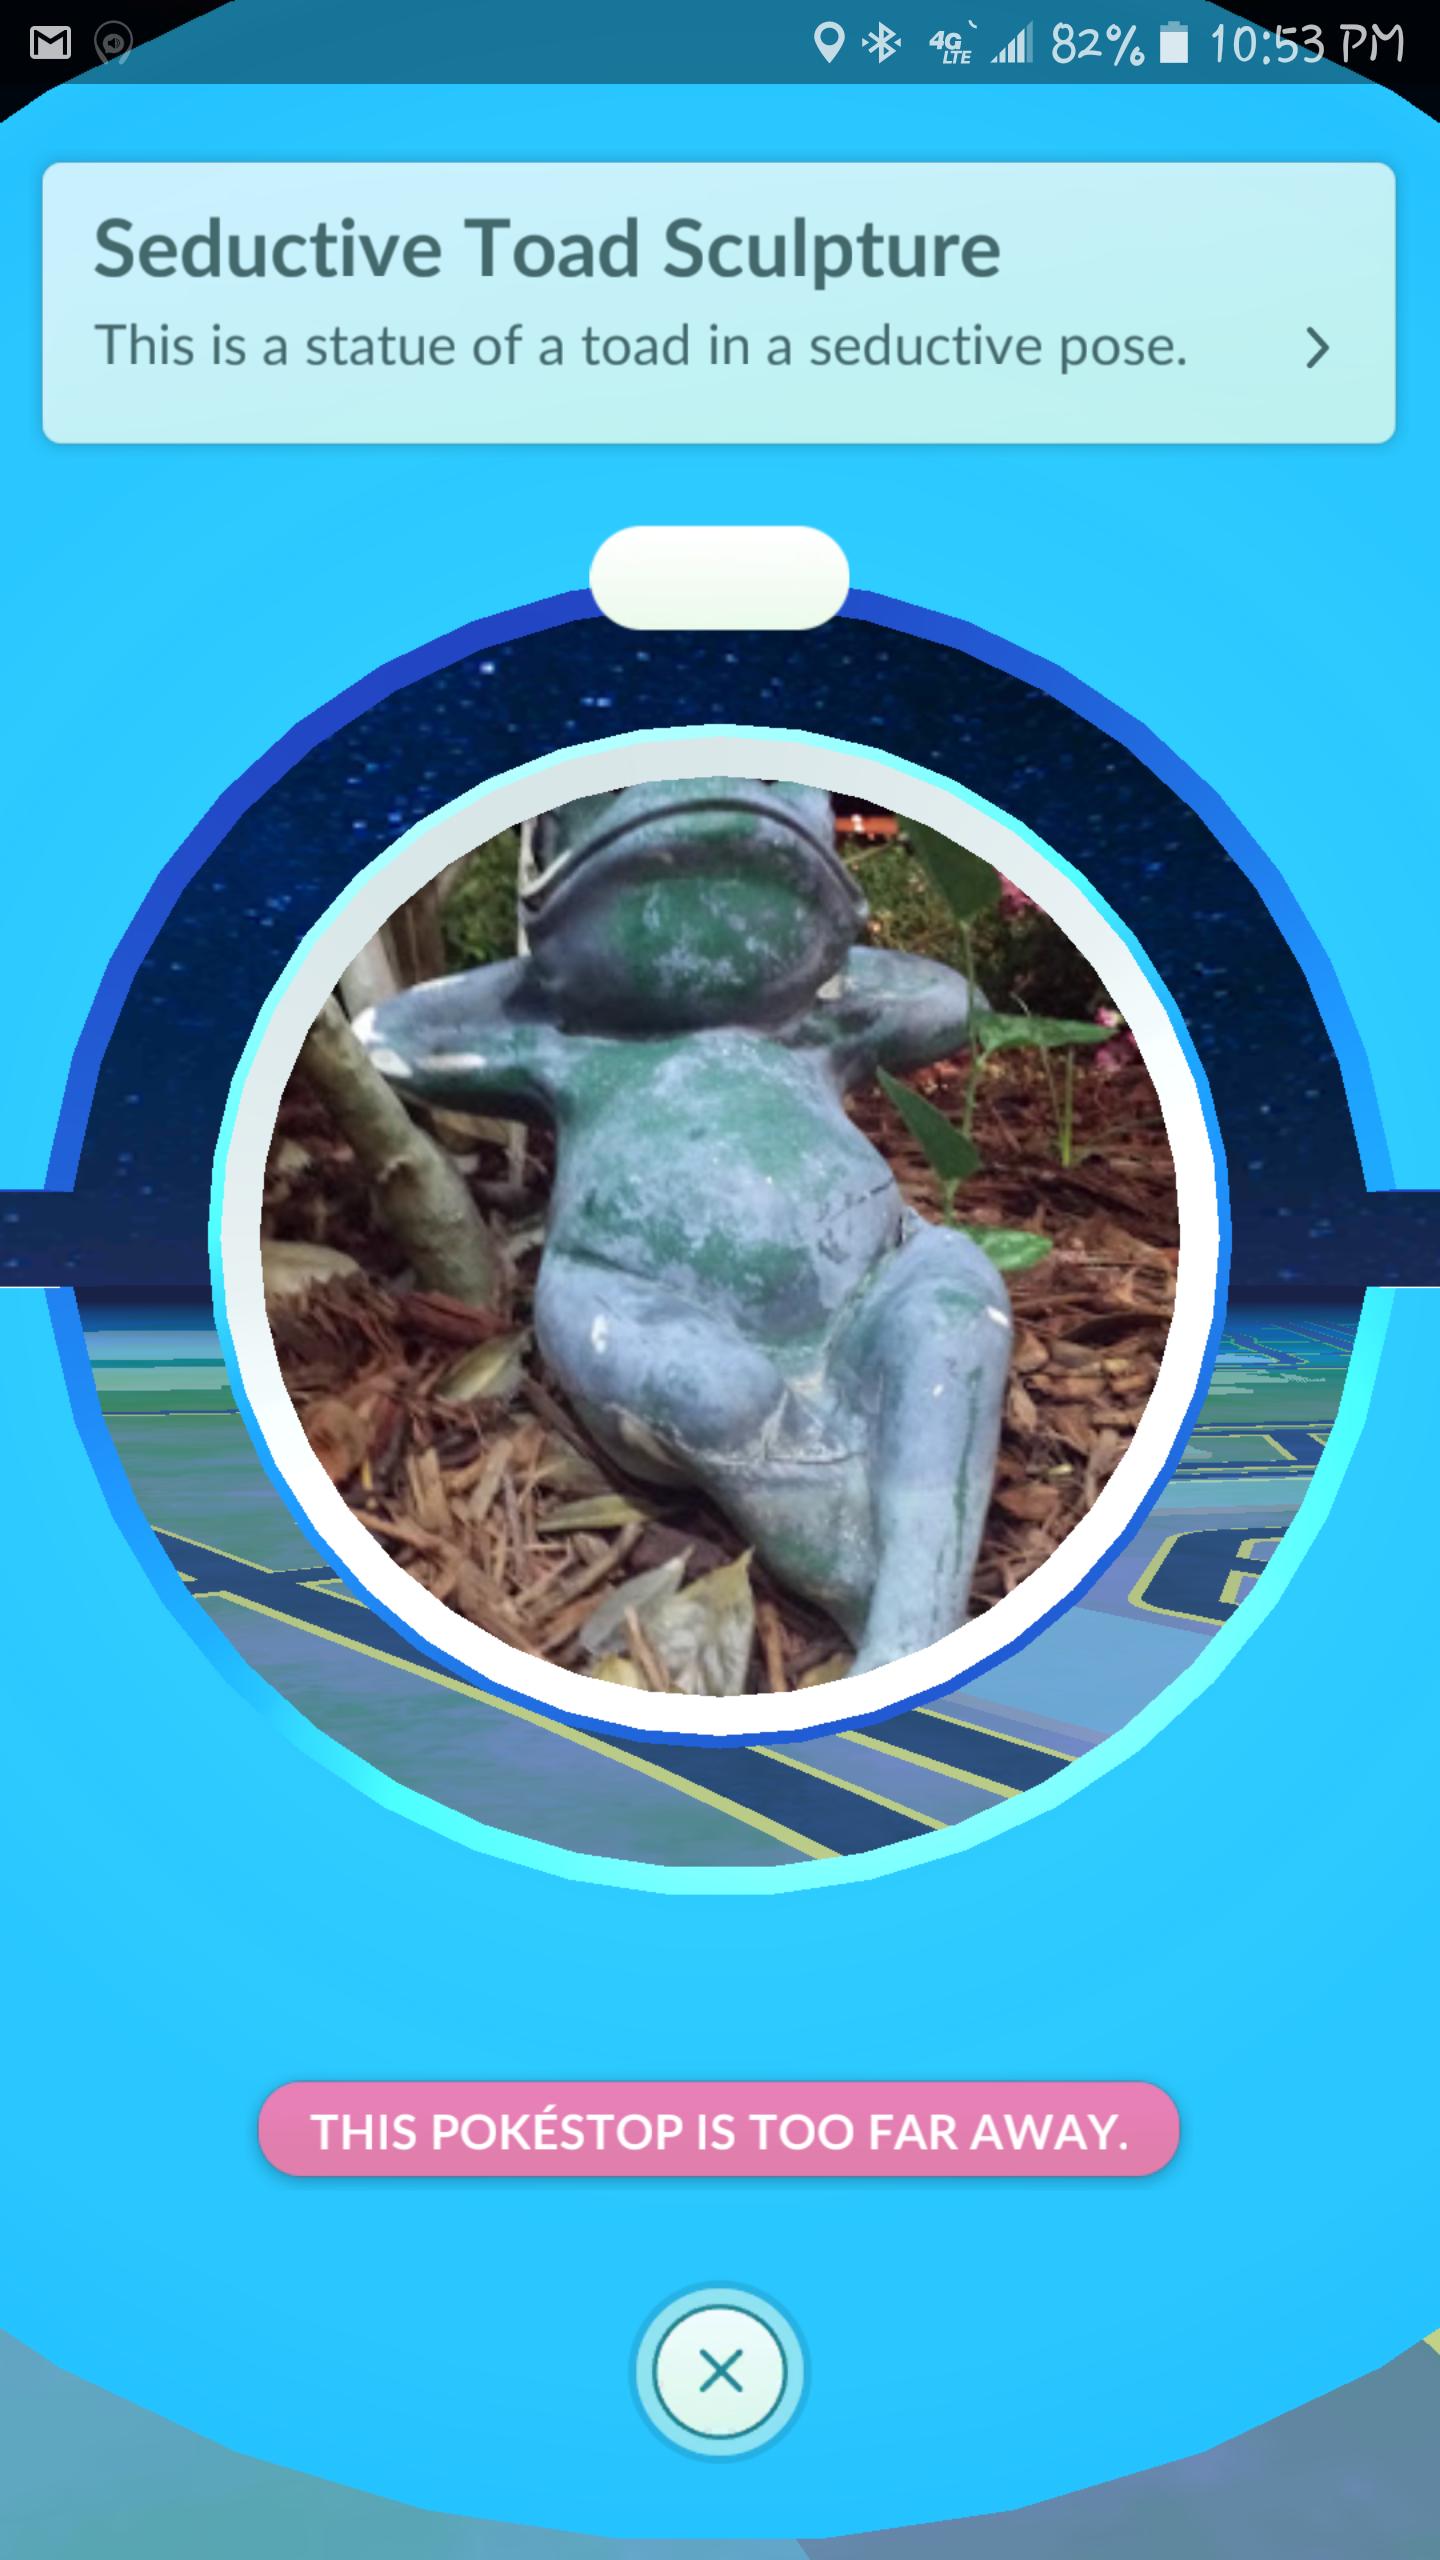 water resources - 0 1 82% Seductive Toad Sculpture This is a statue of a toad in a seductive pose. > This Pokstop Is Too Far Away.